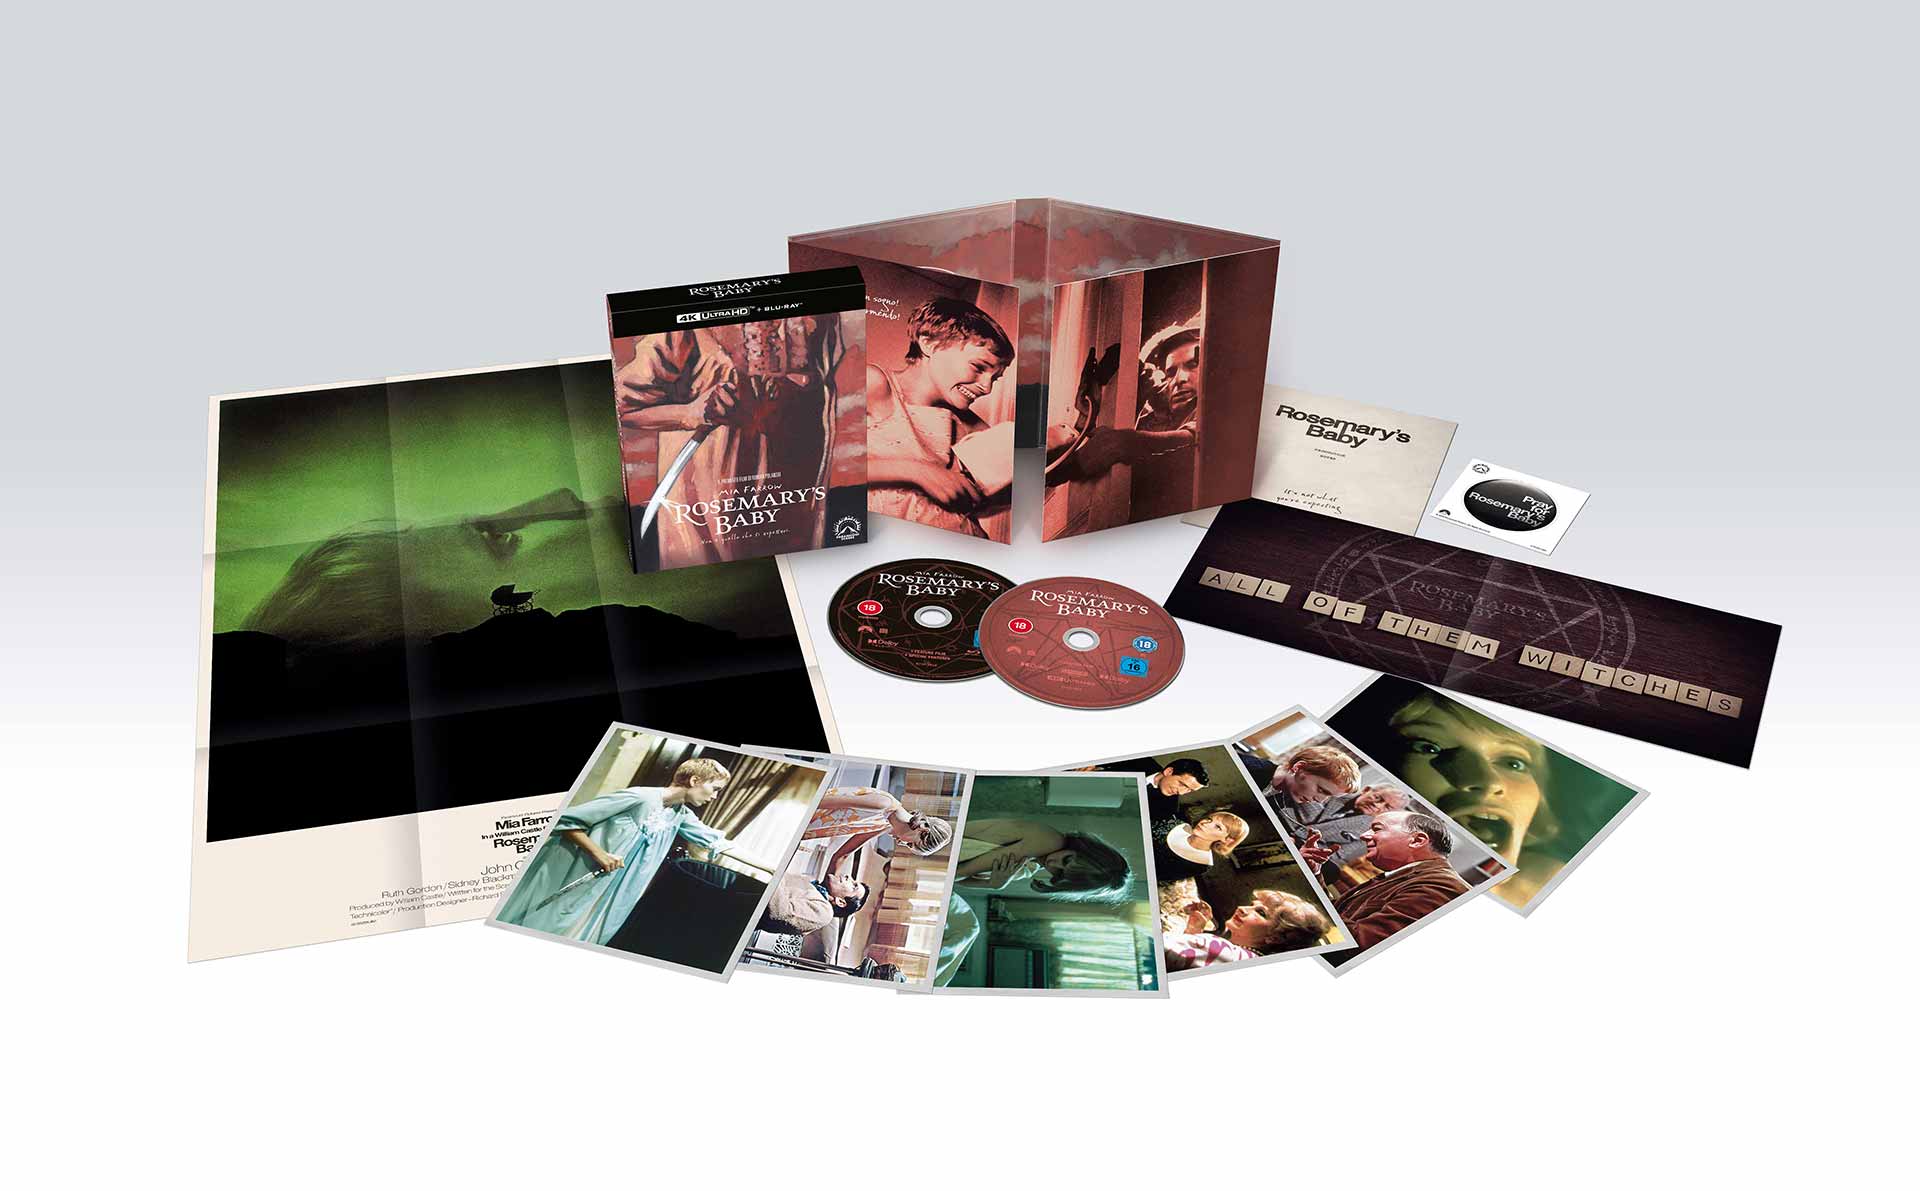 Rosemary's Baby - Nastro Rosso a New York - Collector's Edition 4K Ultra HD + Blu-ray + Gifts (Blu-ray) Image 2